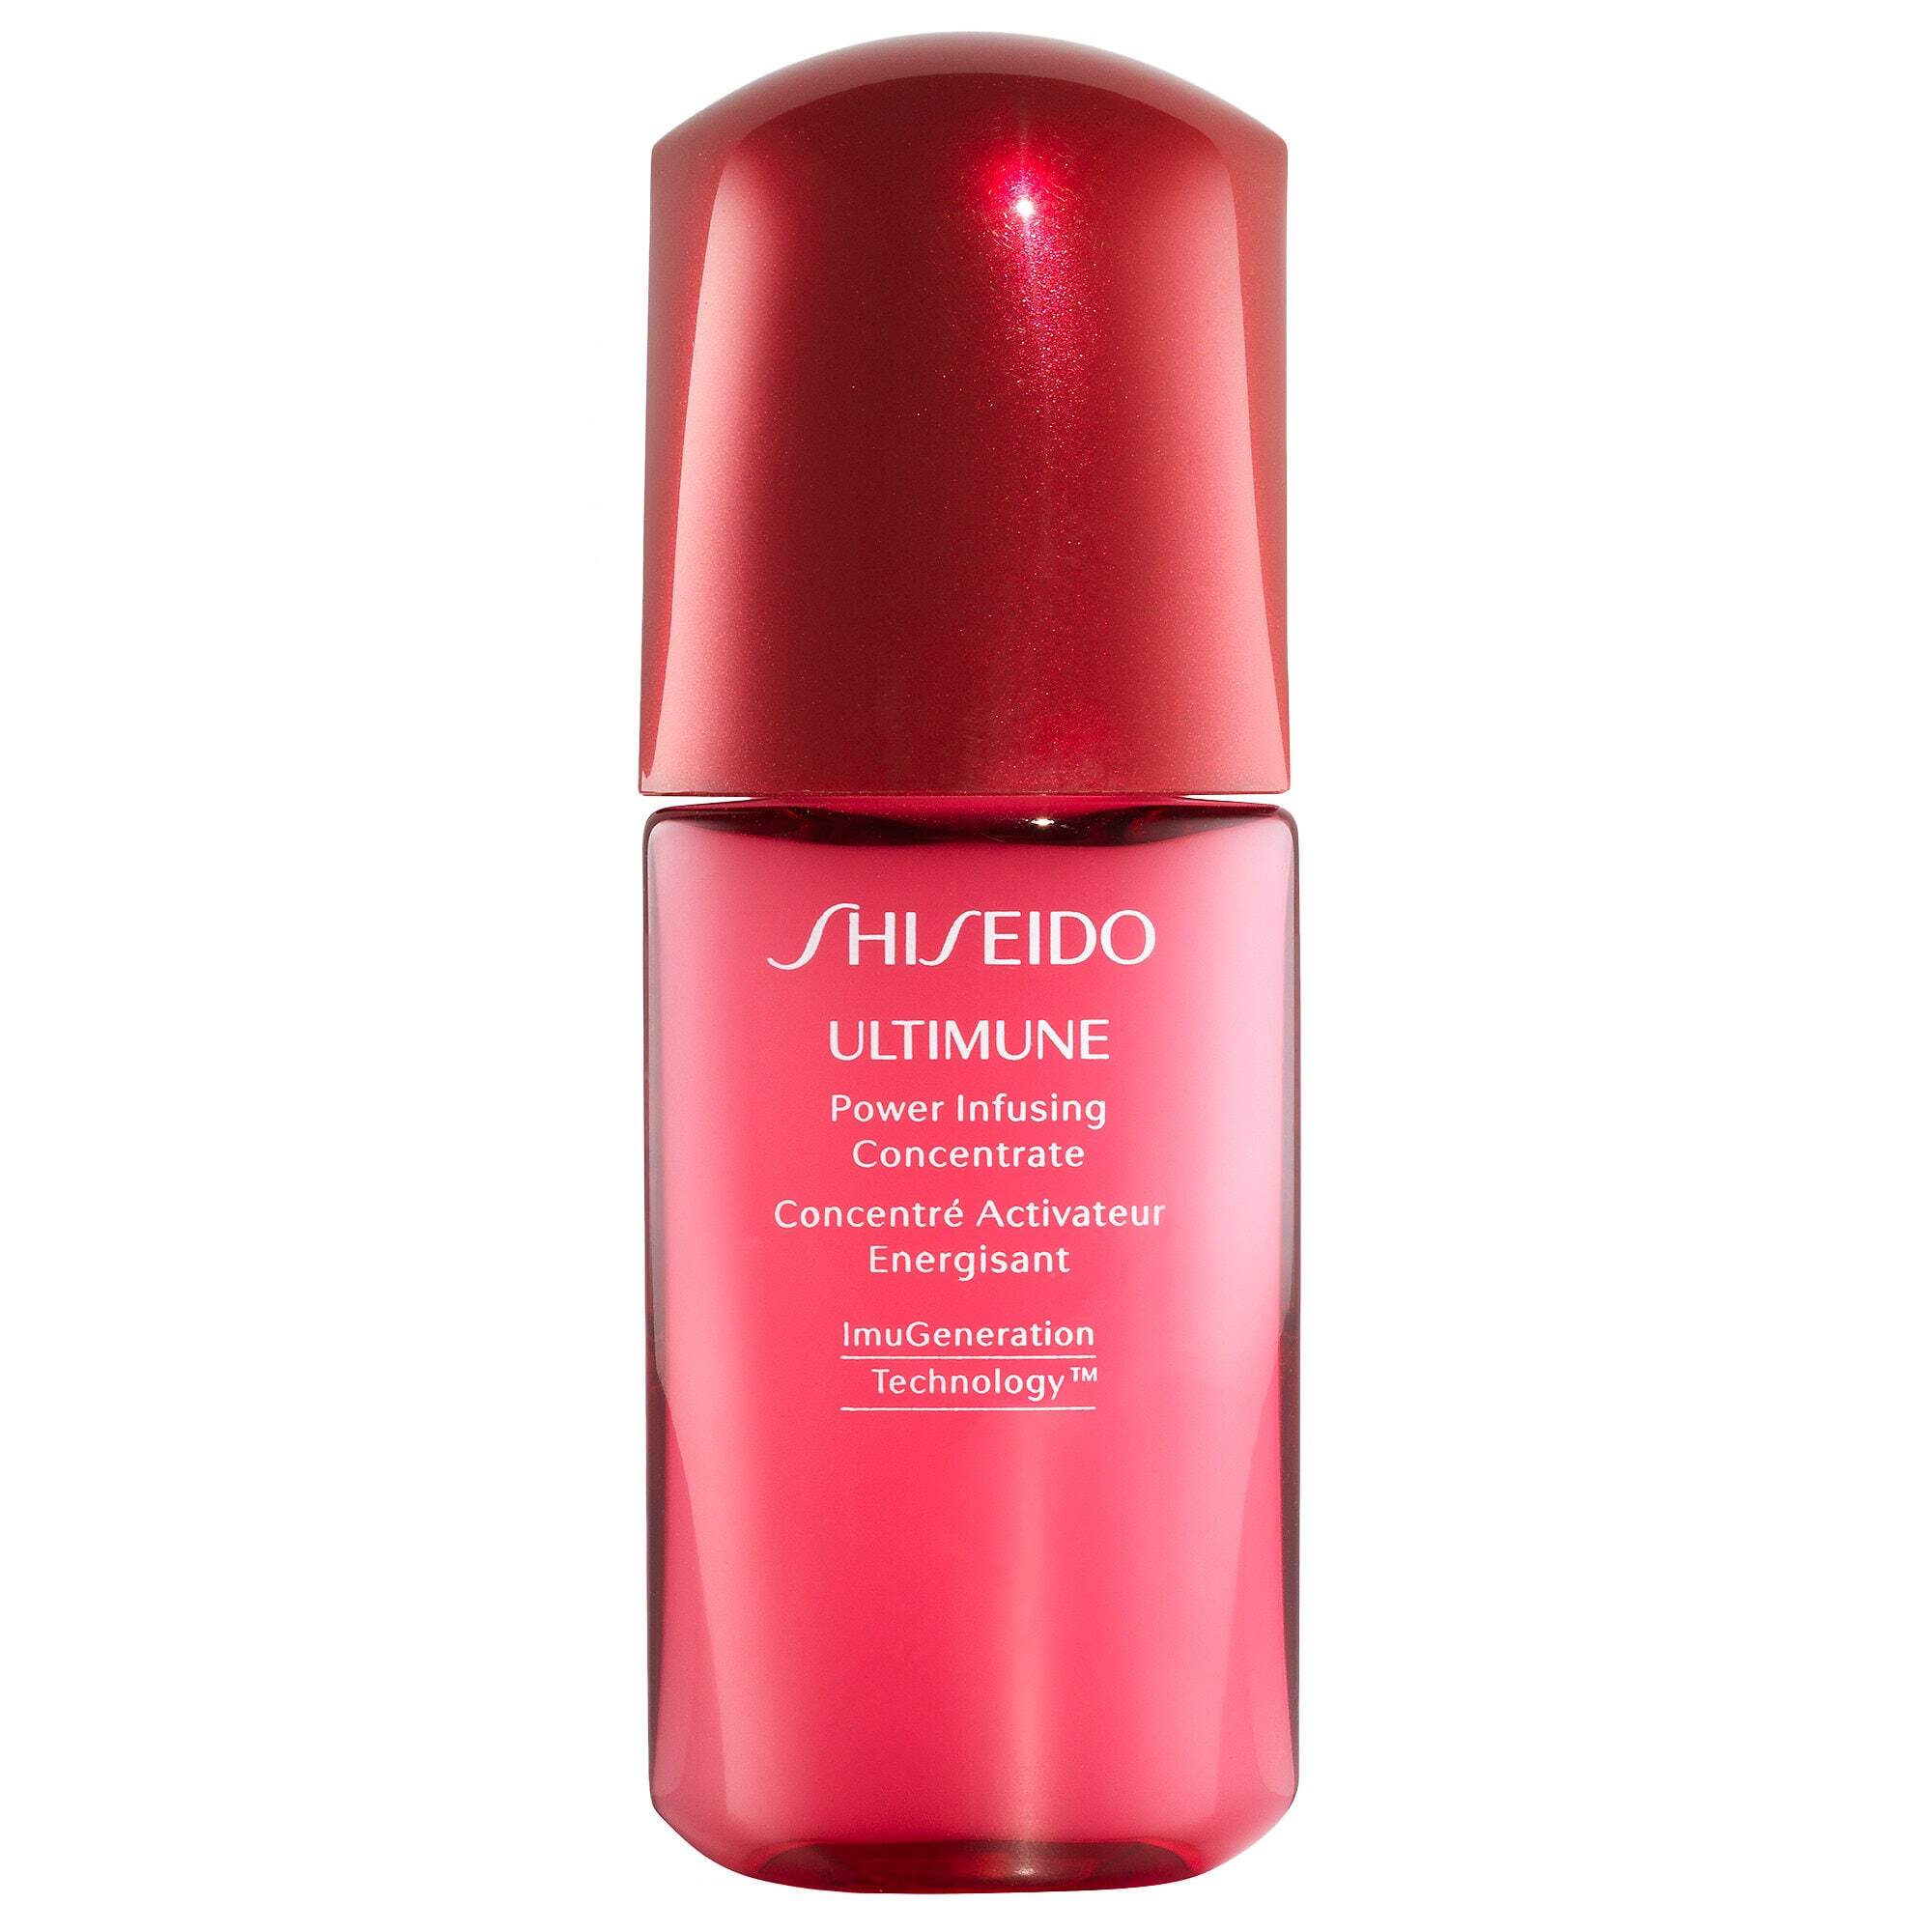 Shiseido power infusing concentrate. Ultimune концентрат шисейдо Power infusing. Концентрат Shiseido Ultimune Power infusing Concentrate. Shiseido Ultimune Power infusing Serum.